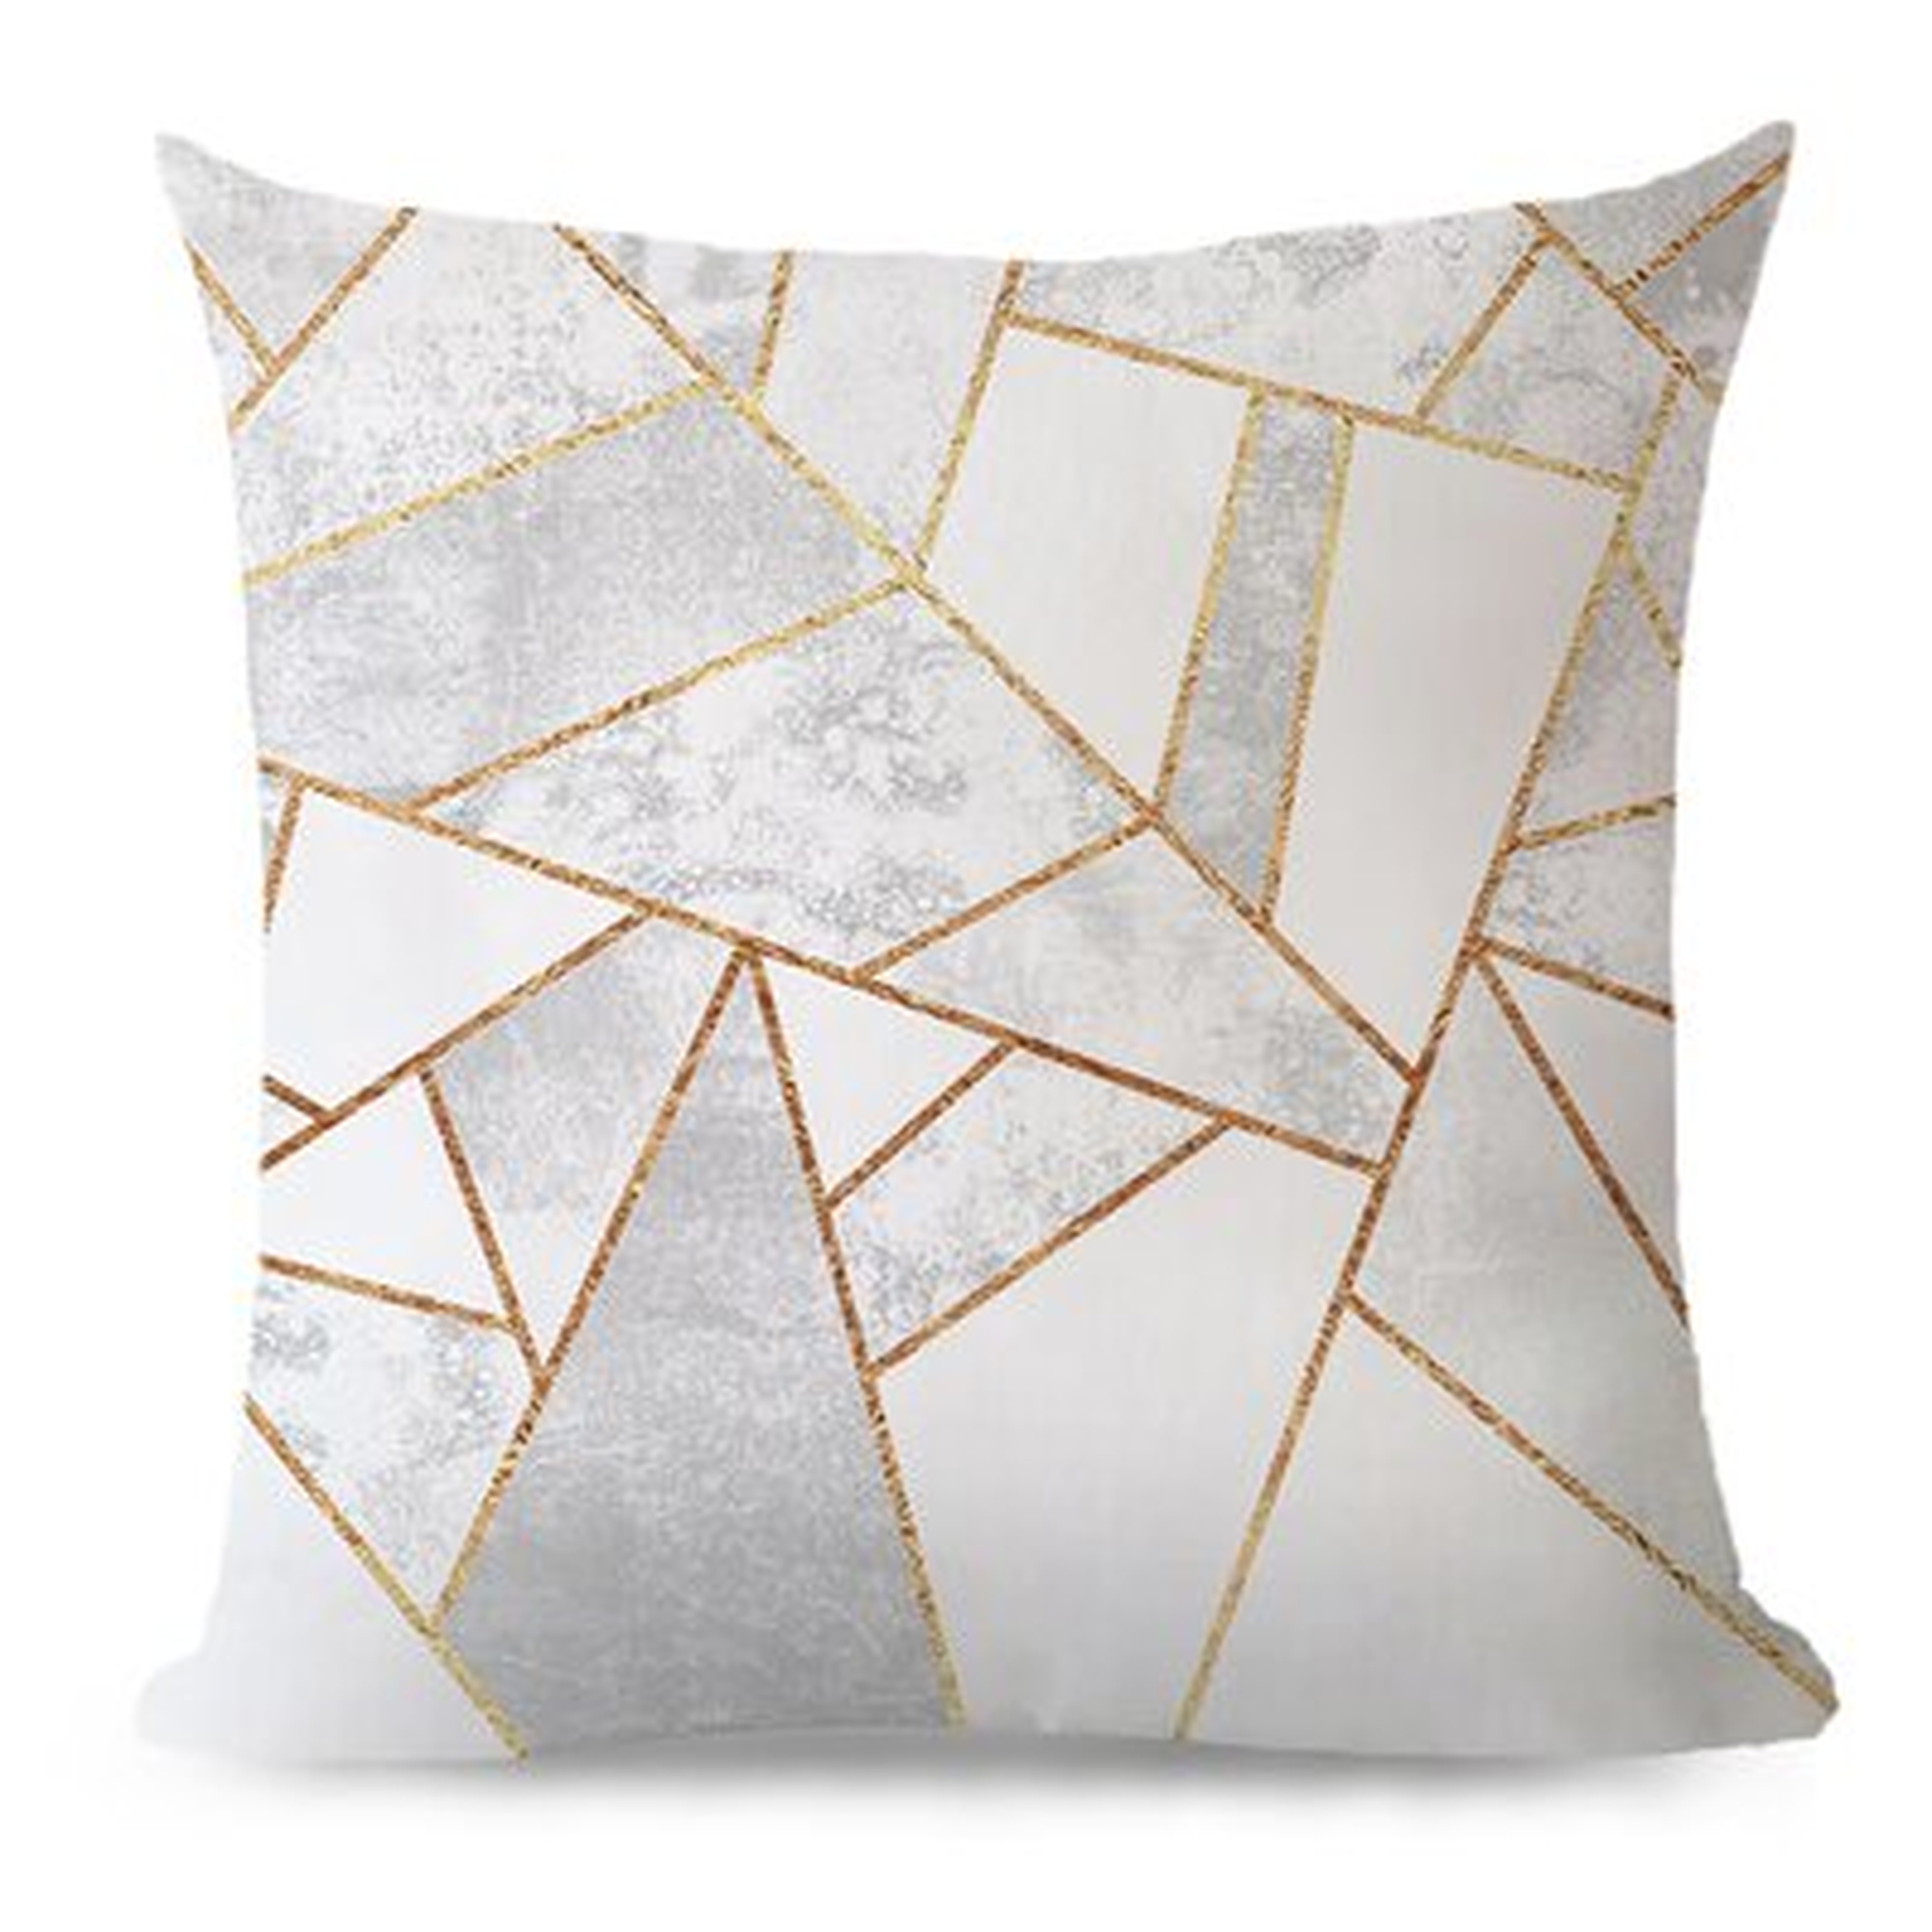 Tugrul Square Pillow Cover - Wayfair